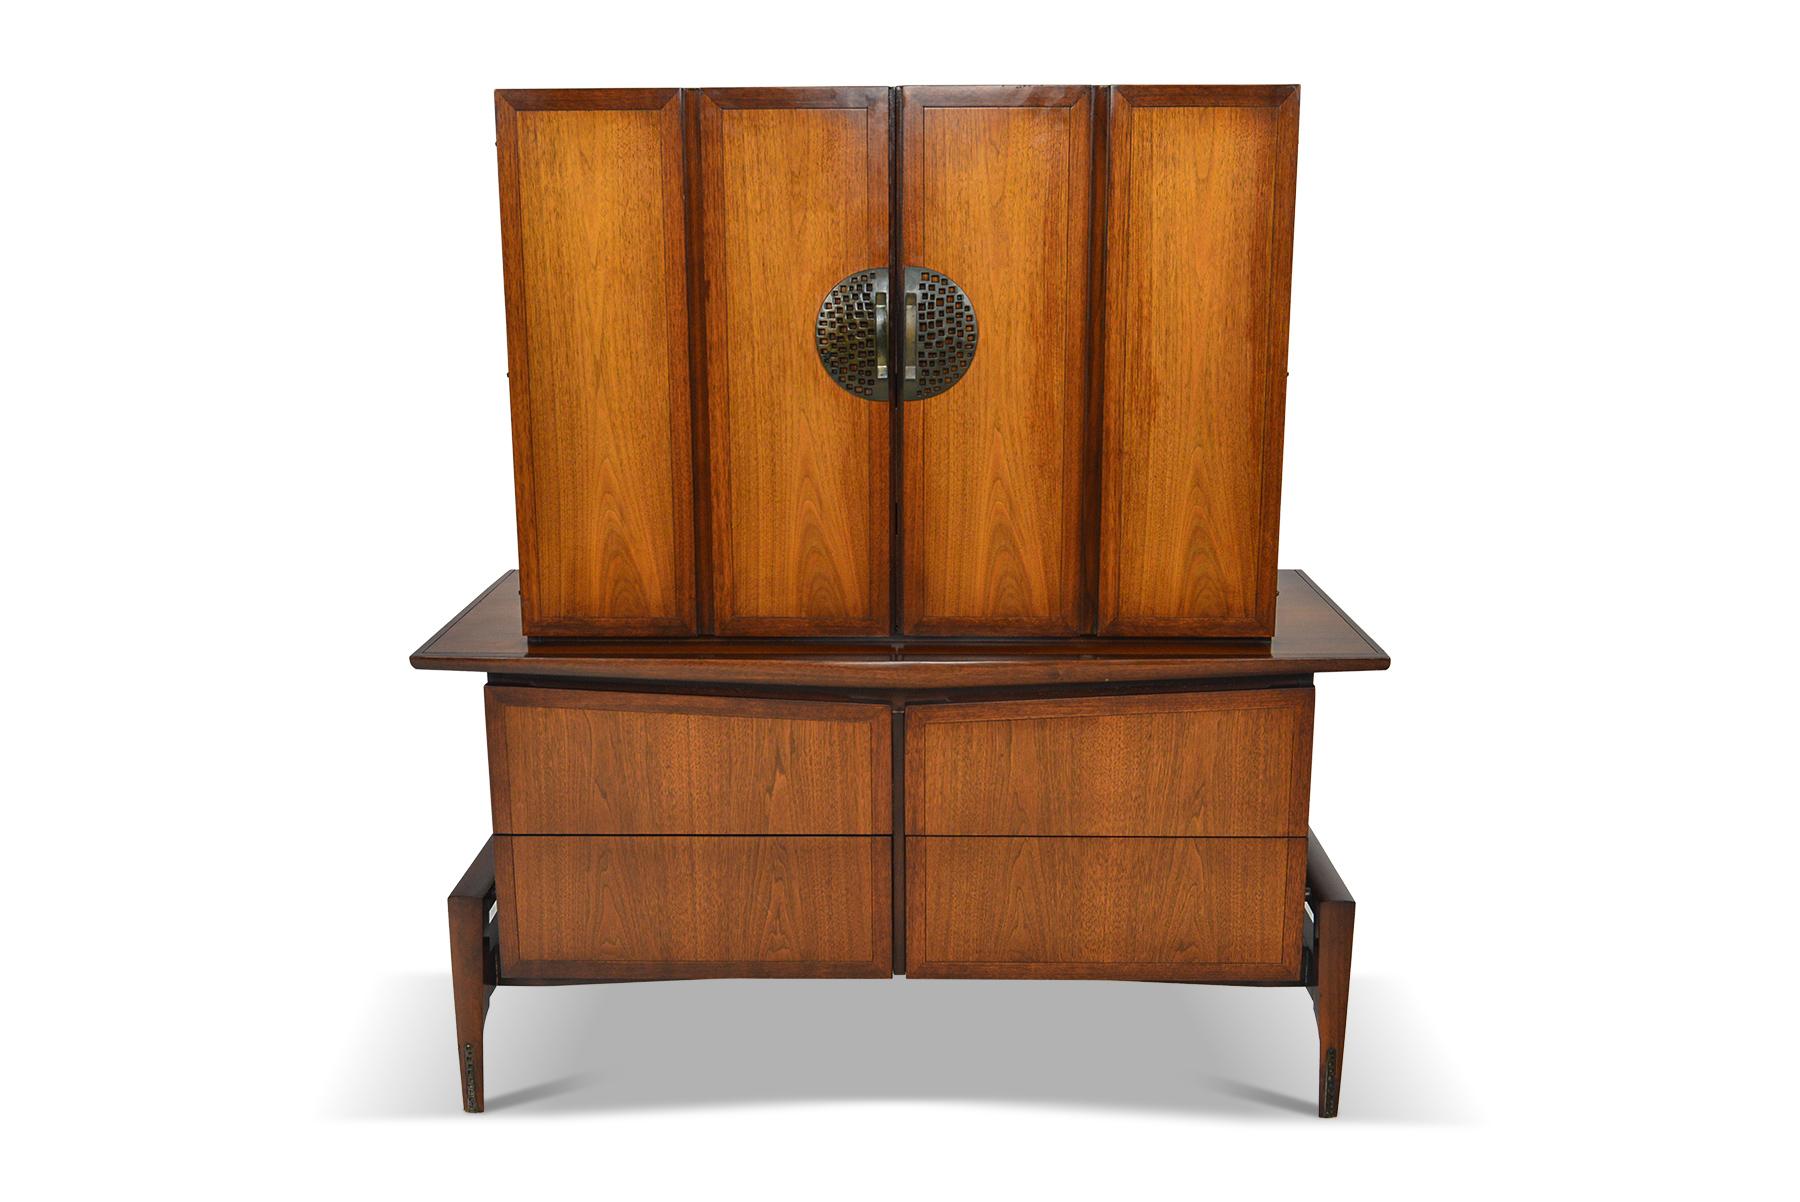 This beautifully crafted walnut highboy dresser was designed by Helen Hobey Baker for Baker furniture in the late 1960s. In excellent original condition.

Measurements: 49 wide x 21 deep x 54 tall
Drawer: 33 wide x 15.5 deep x 4 tall.